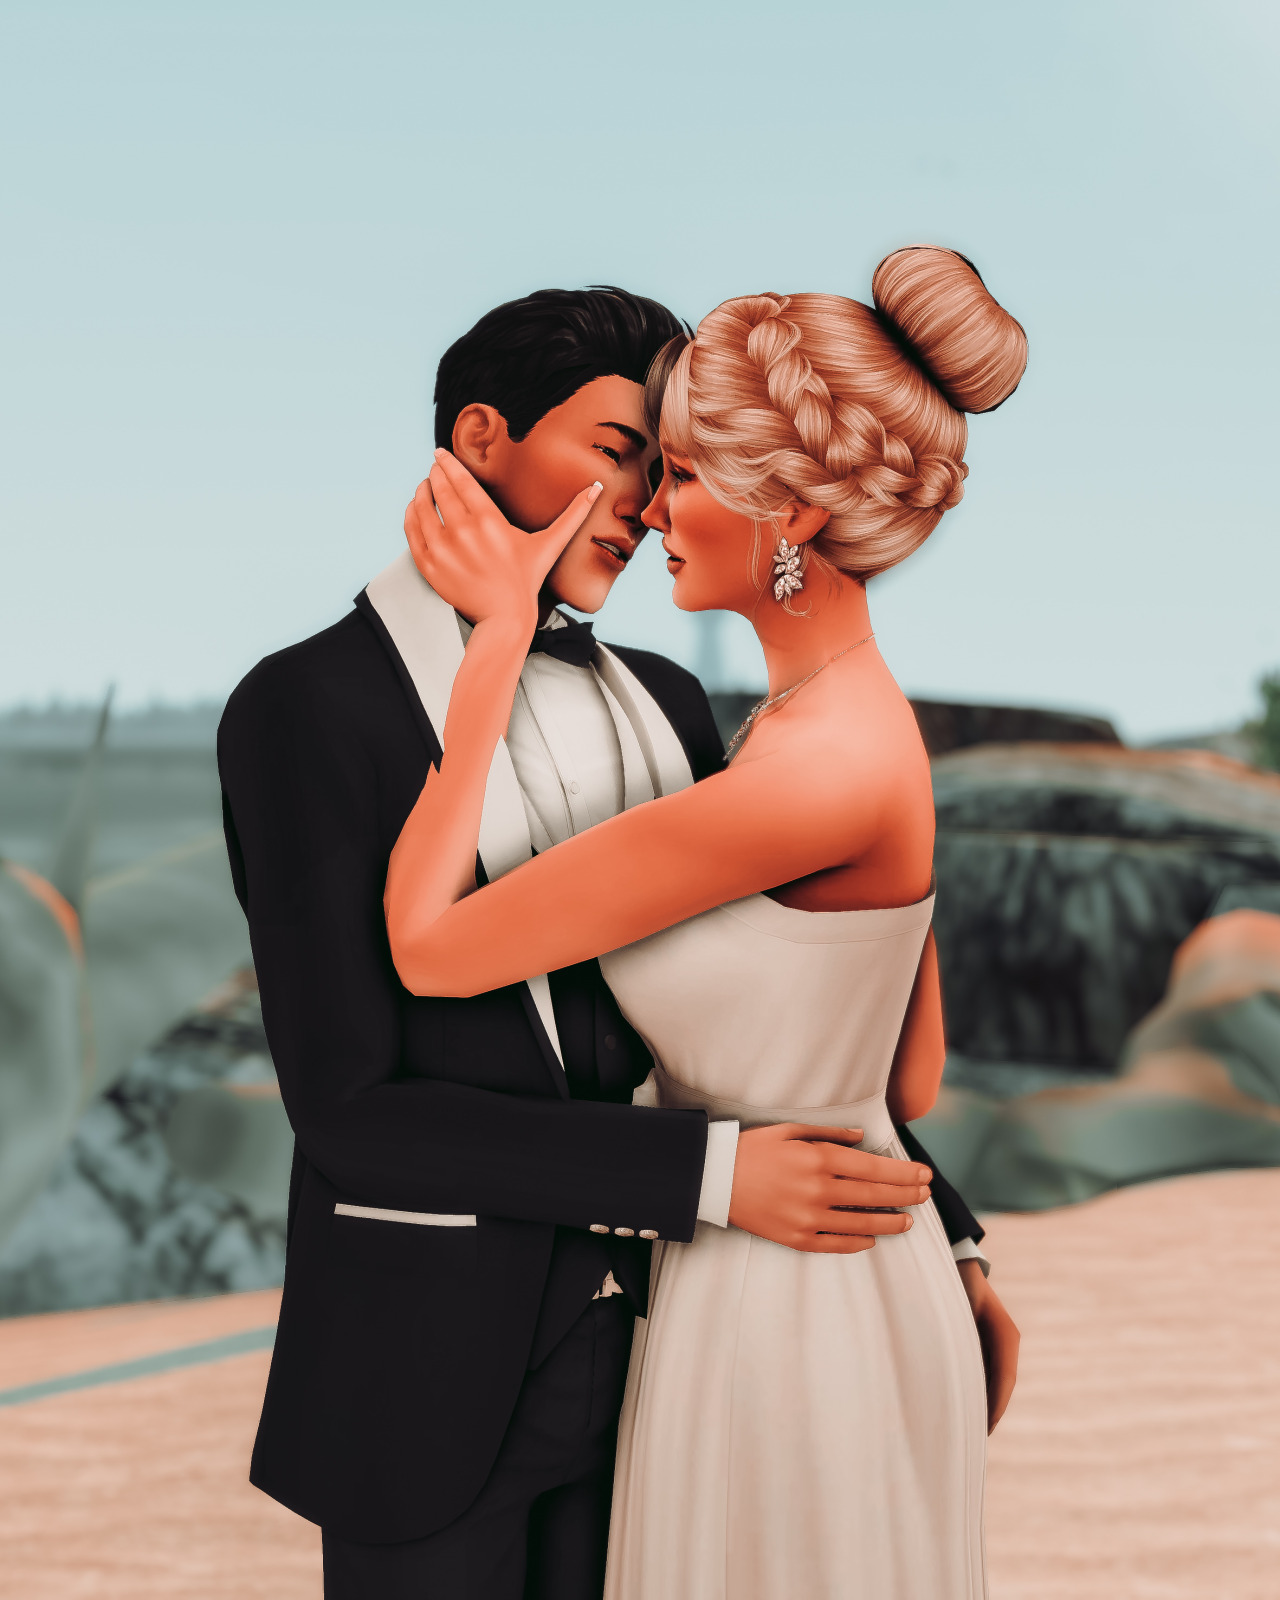 I recently got Andrew's Pose Player and as someone who loves photography in  this game, I'm in love 😍 I am currently in the process of remaking  everyone's wedding photos in my